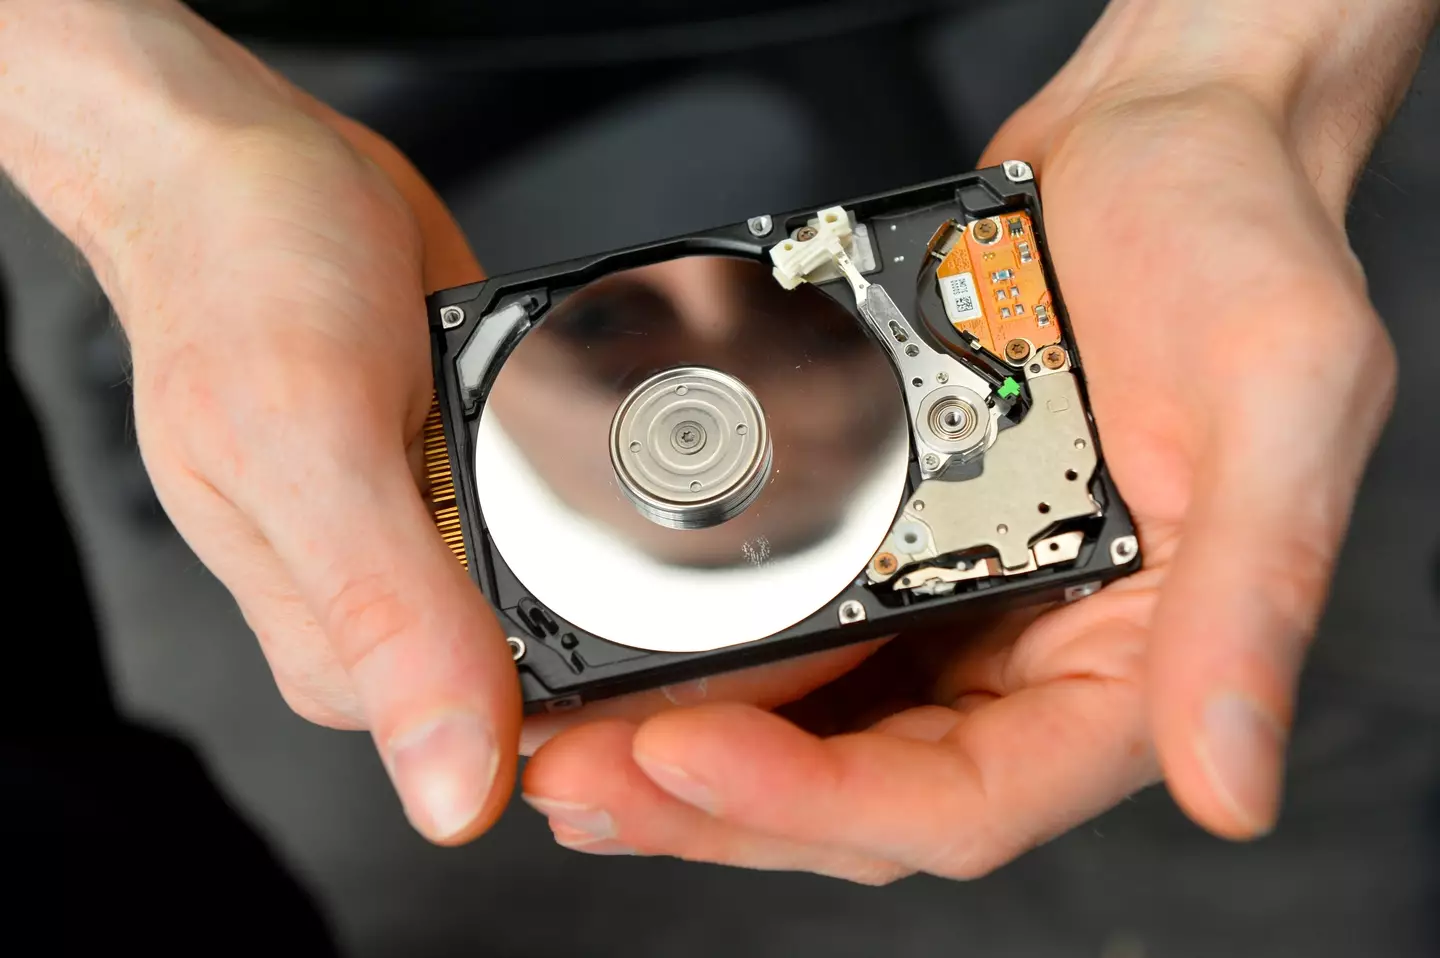 The Bitcoin will be on a hard drive similar to this one.